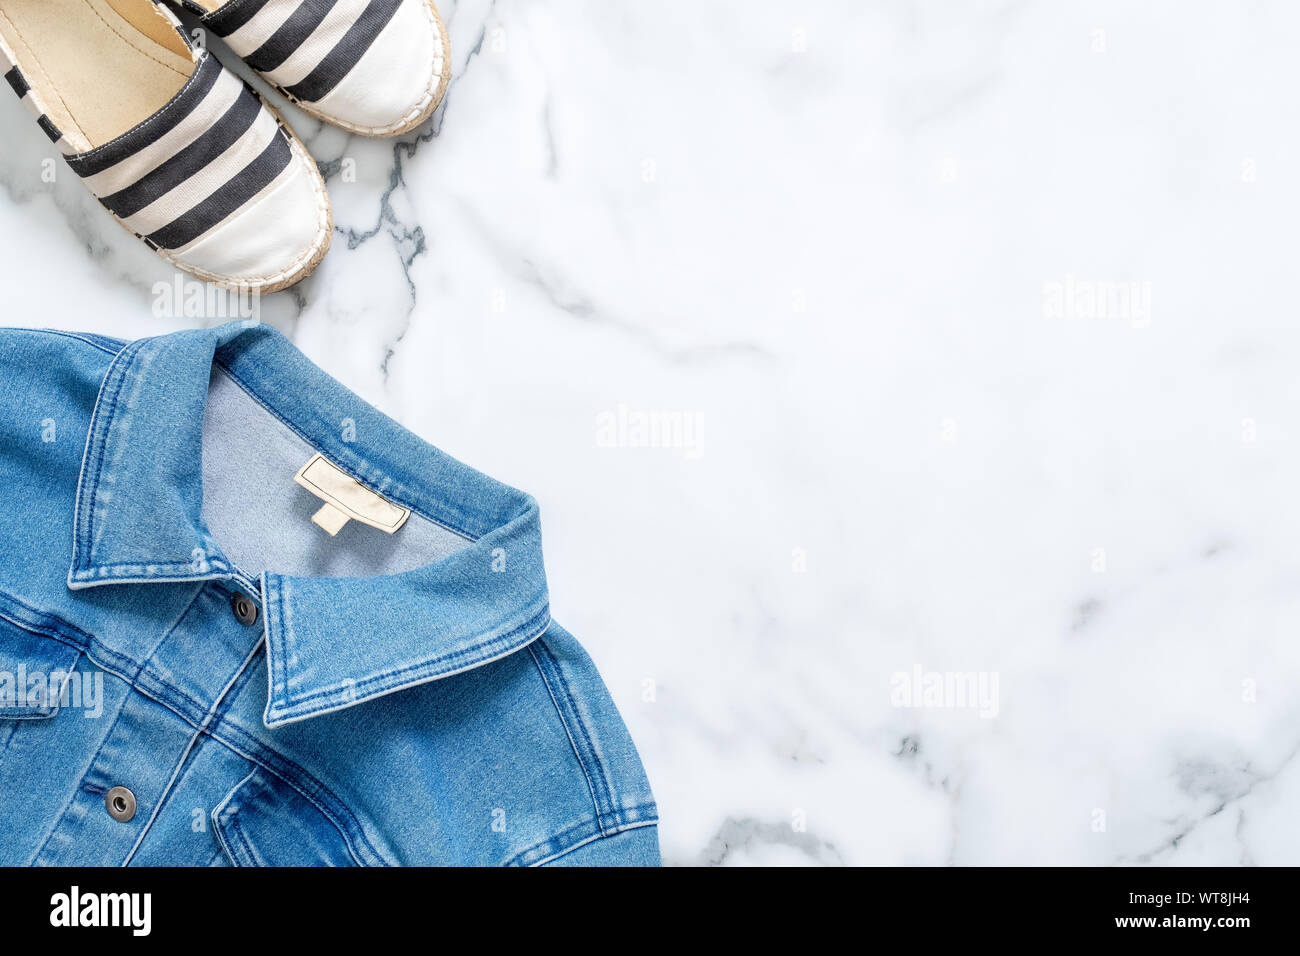 Border frame of striped sandals and jeans jacket on marble background. Trendy flat lay composition, casual clothing of beauty fashion blogger, fashion Stock Photo